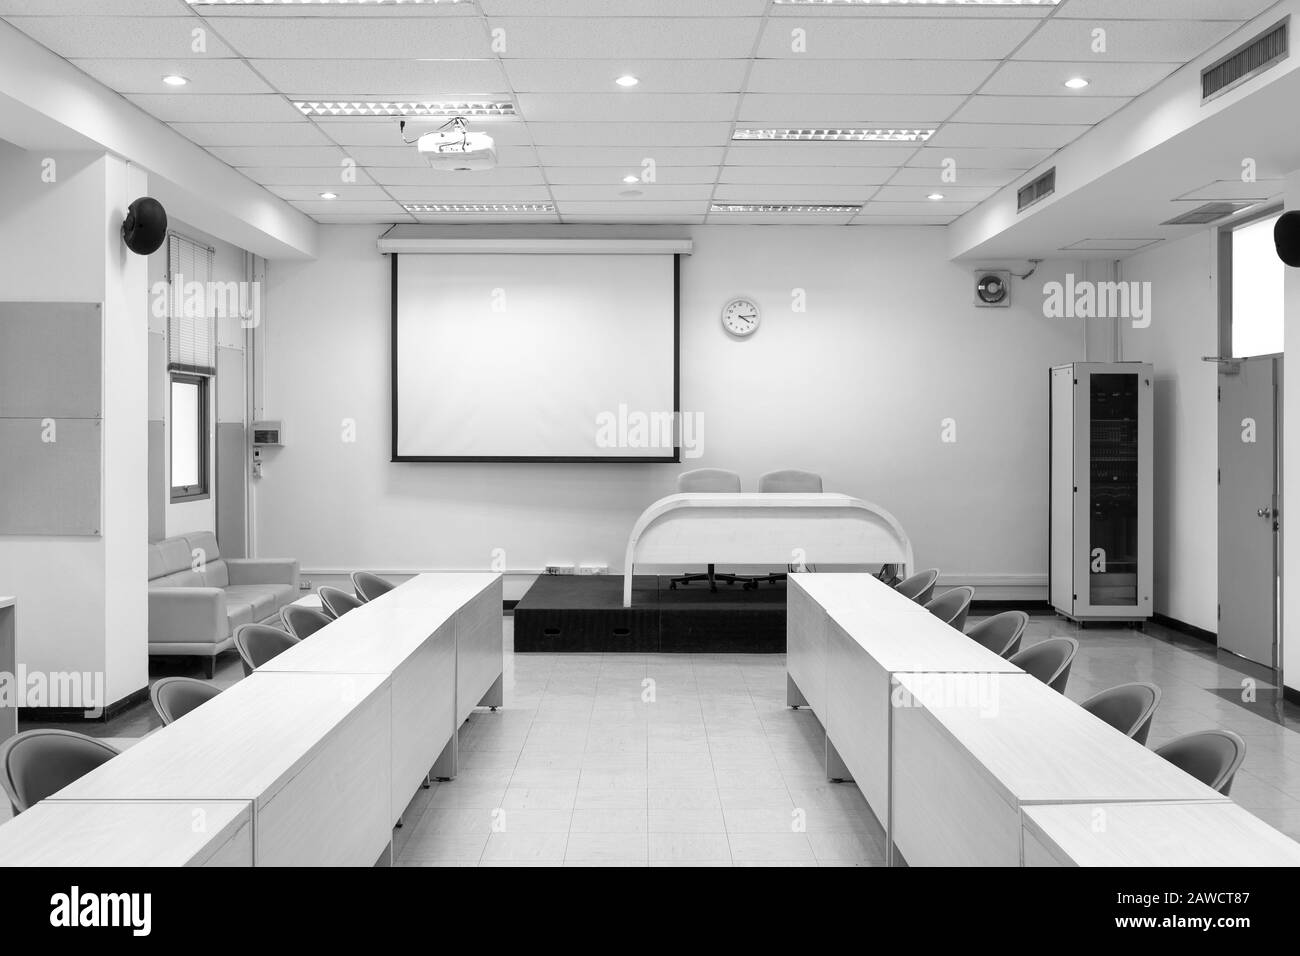 Interior conference room, meeting room, boardroom, Classroom, Office, with white projector board. Stock Photo